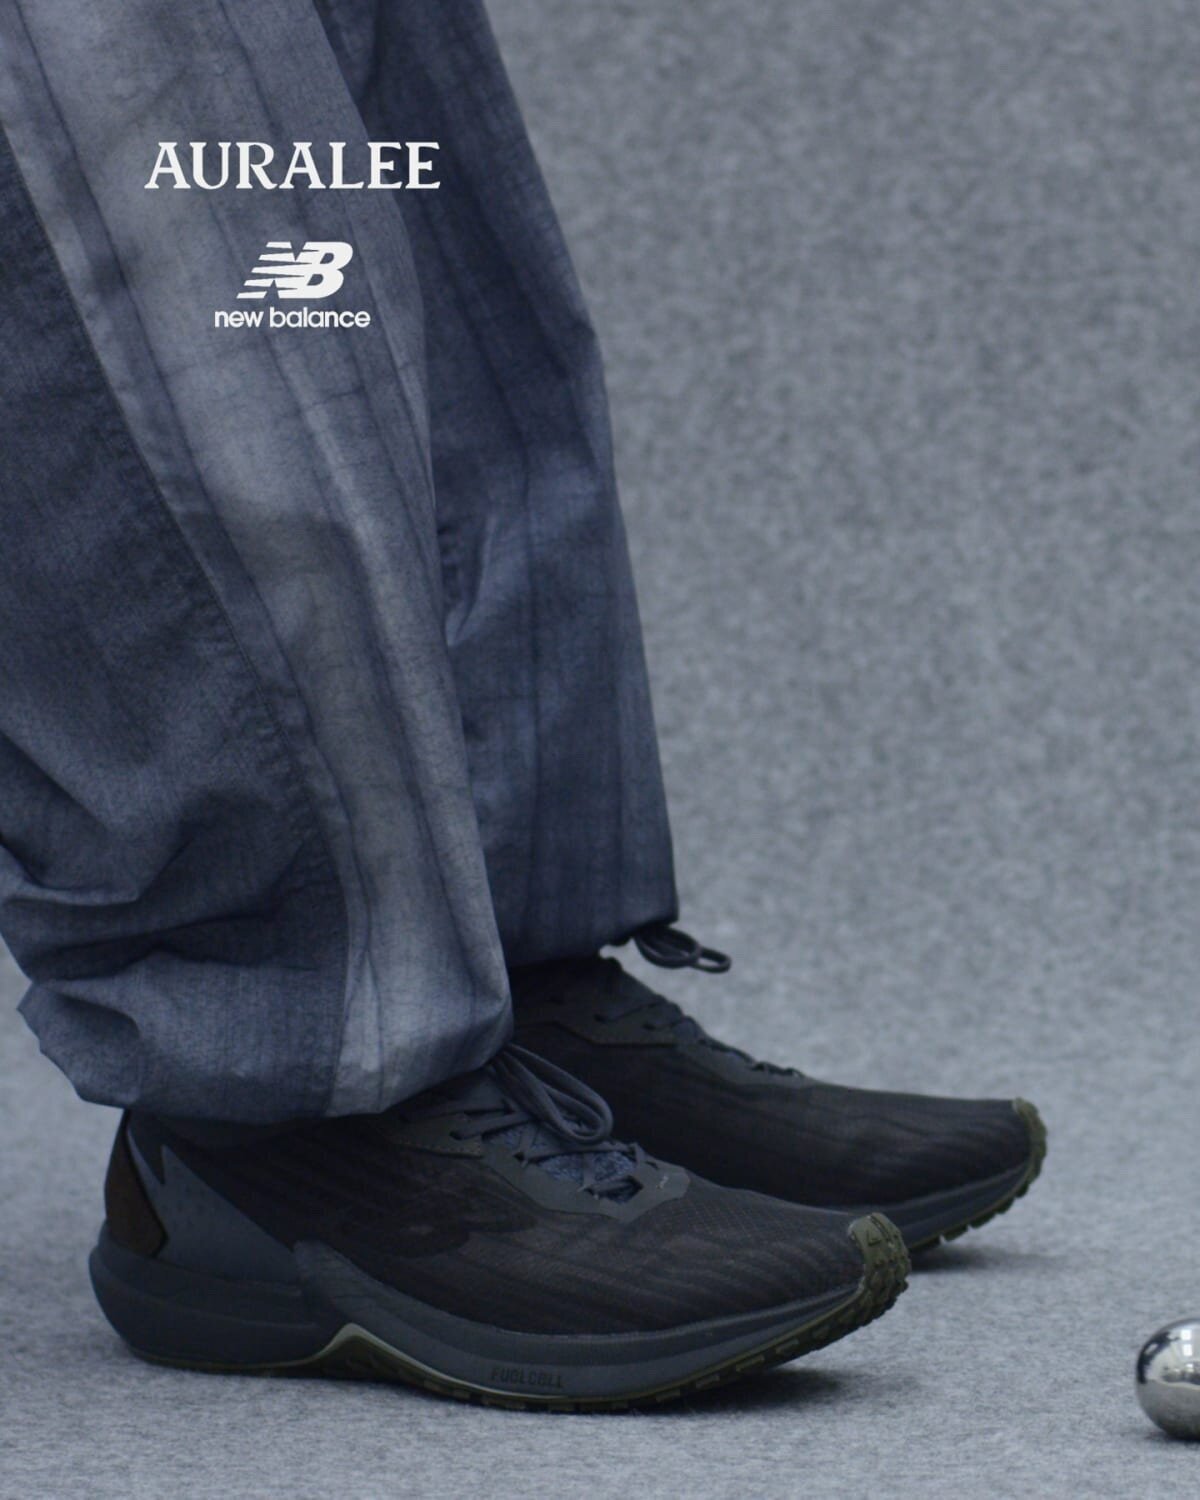 AURALEE Dresses Up The New Balance Fuel Cell Speedrift In Two 